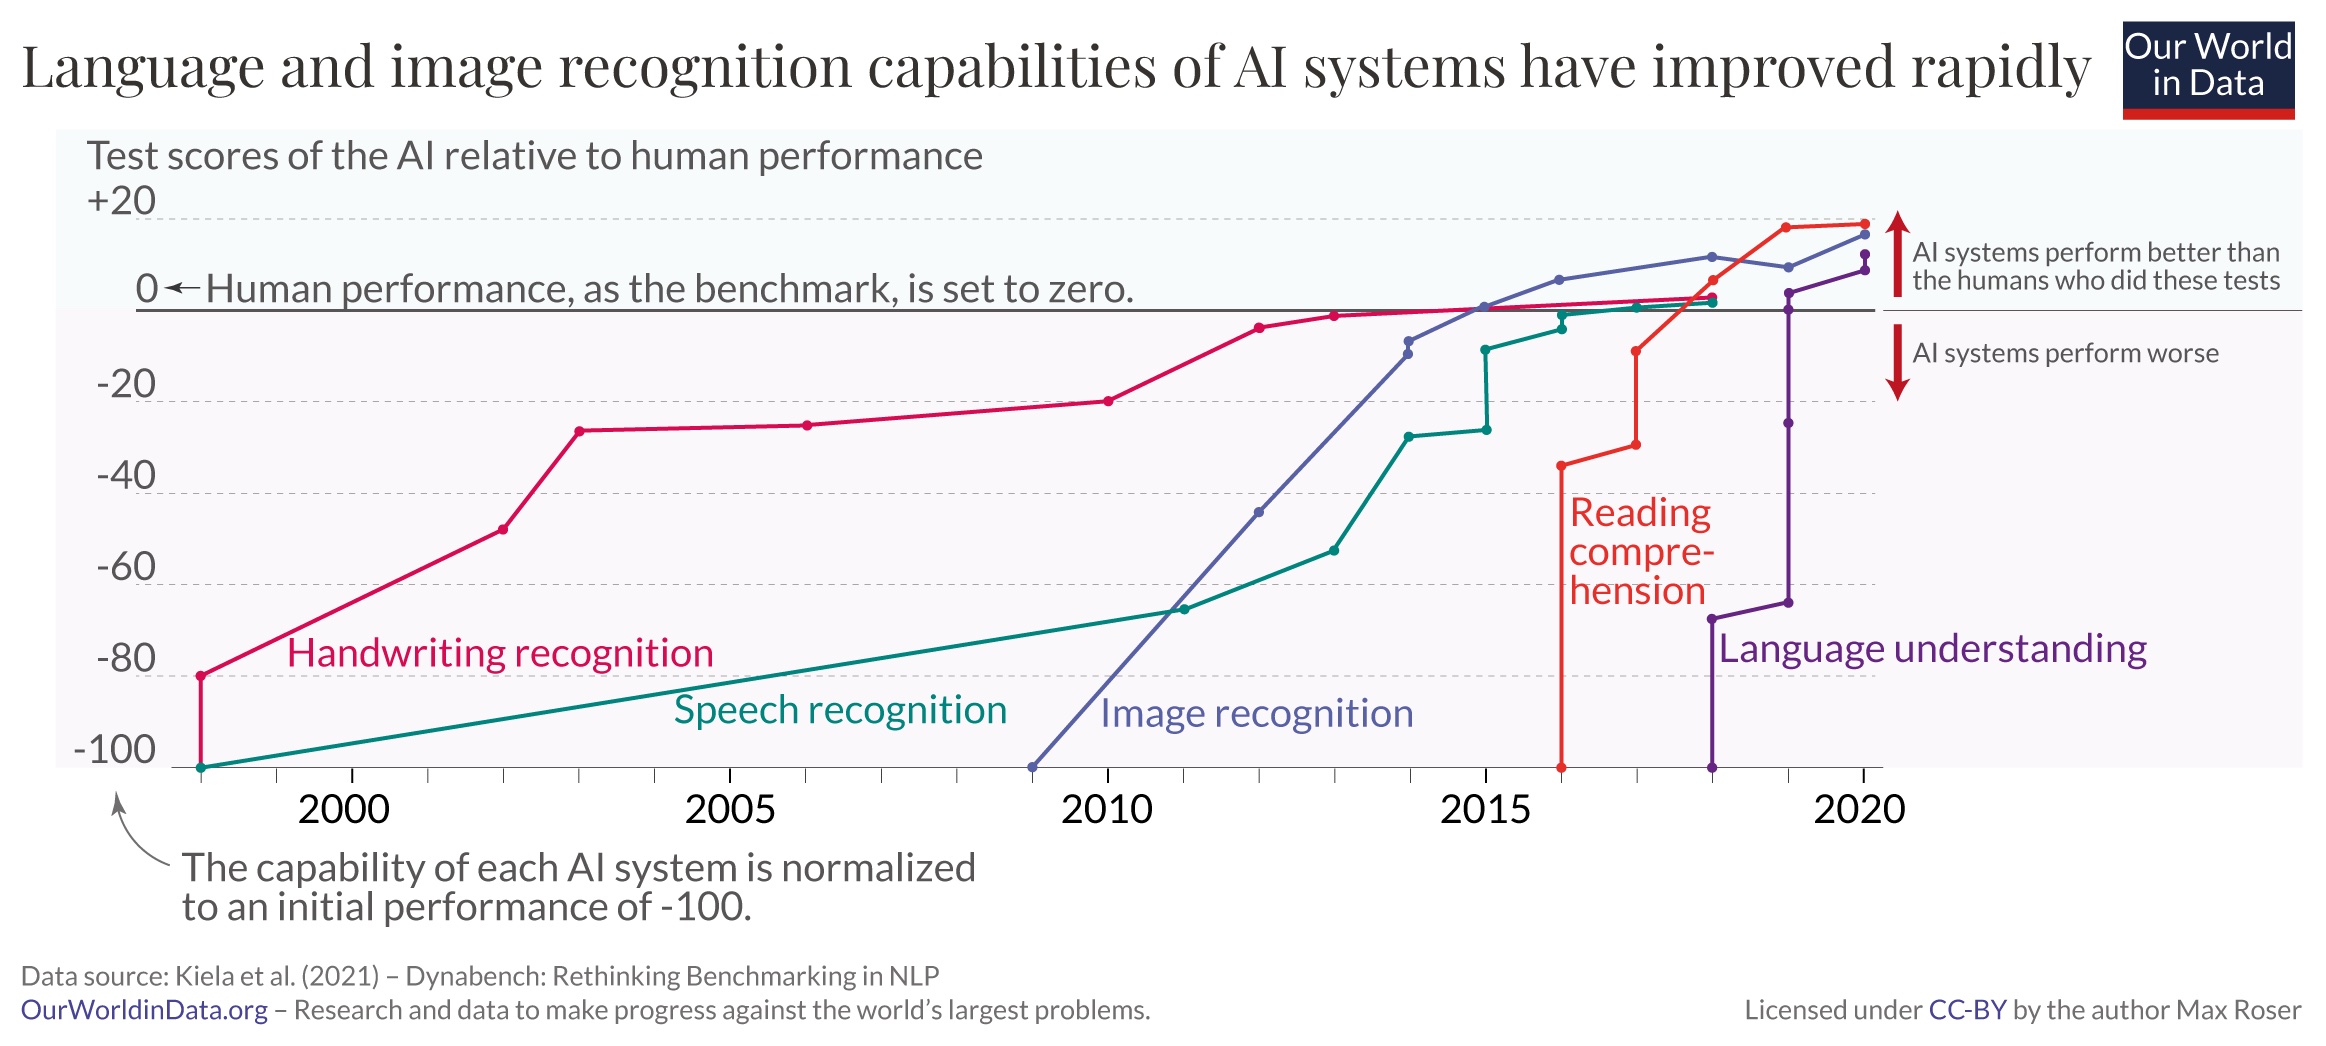 Graph showing the rapid improvement of ai systems in language and image recognition, surpassing human performance in some areas.